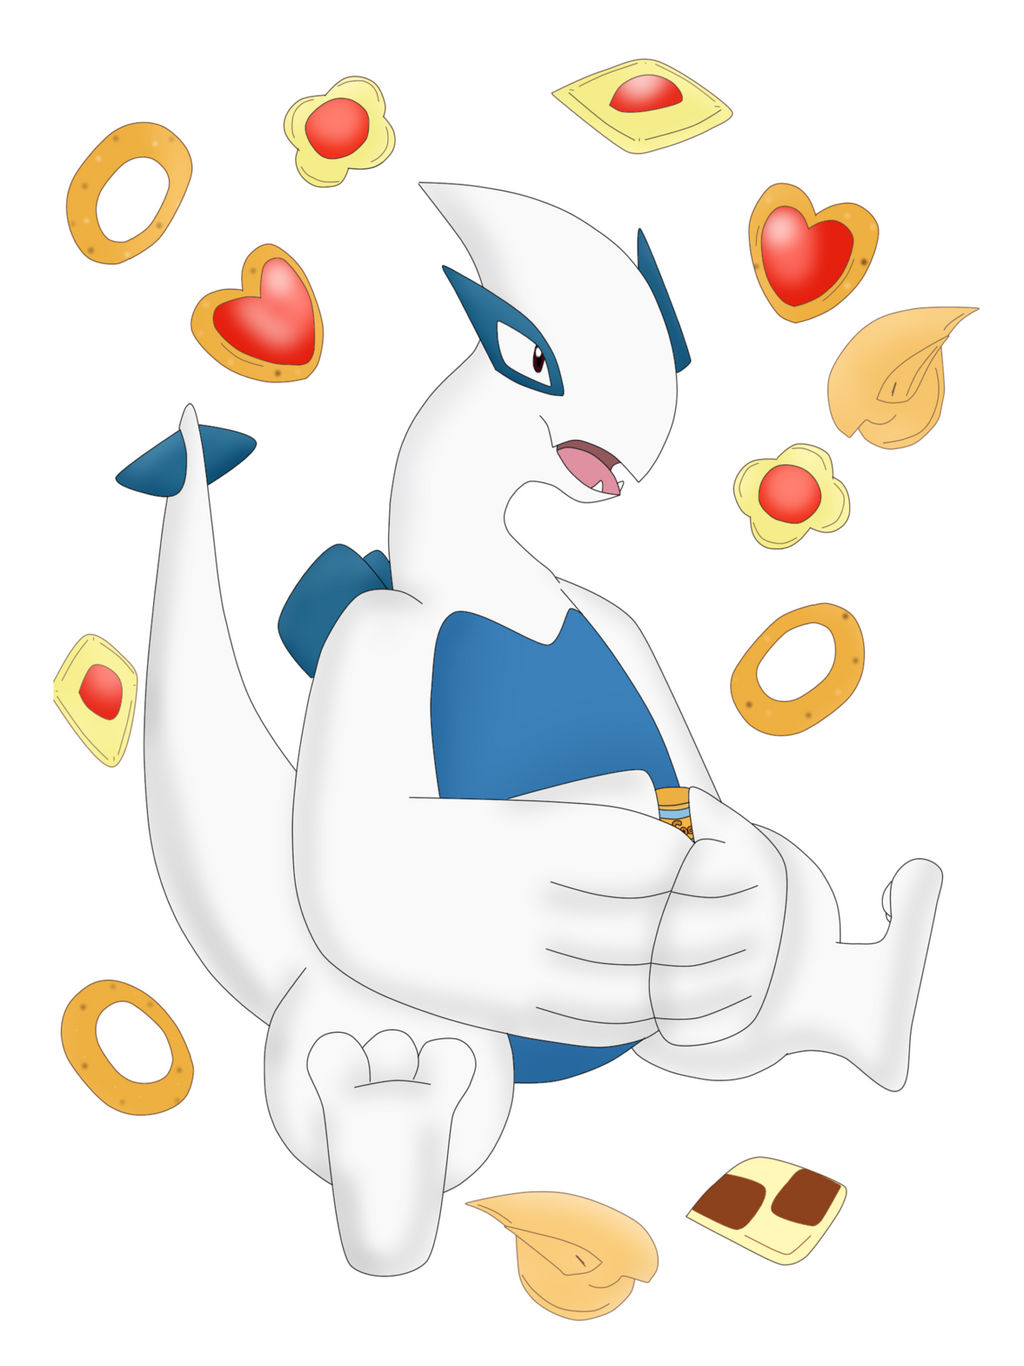 Lucian the Lugia by NS-Games on DeviantArt